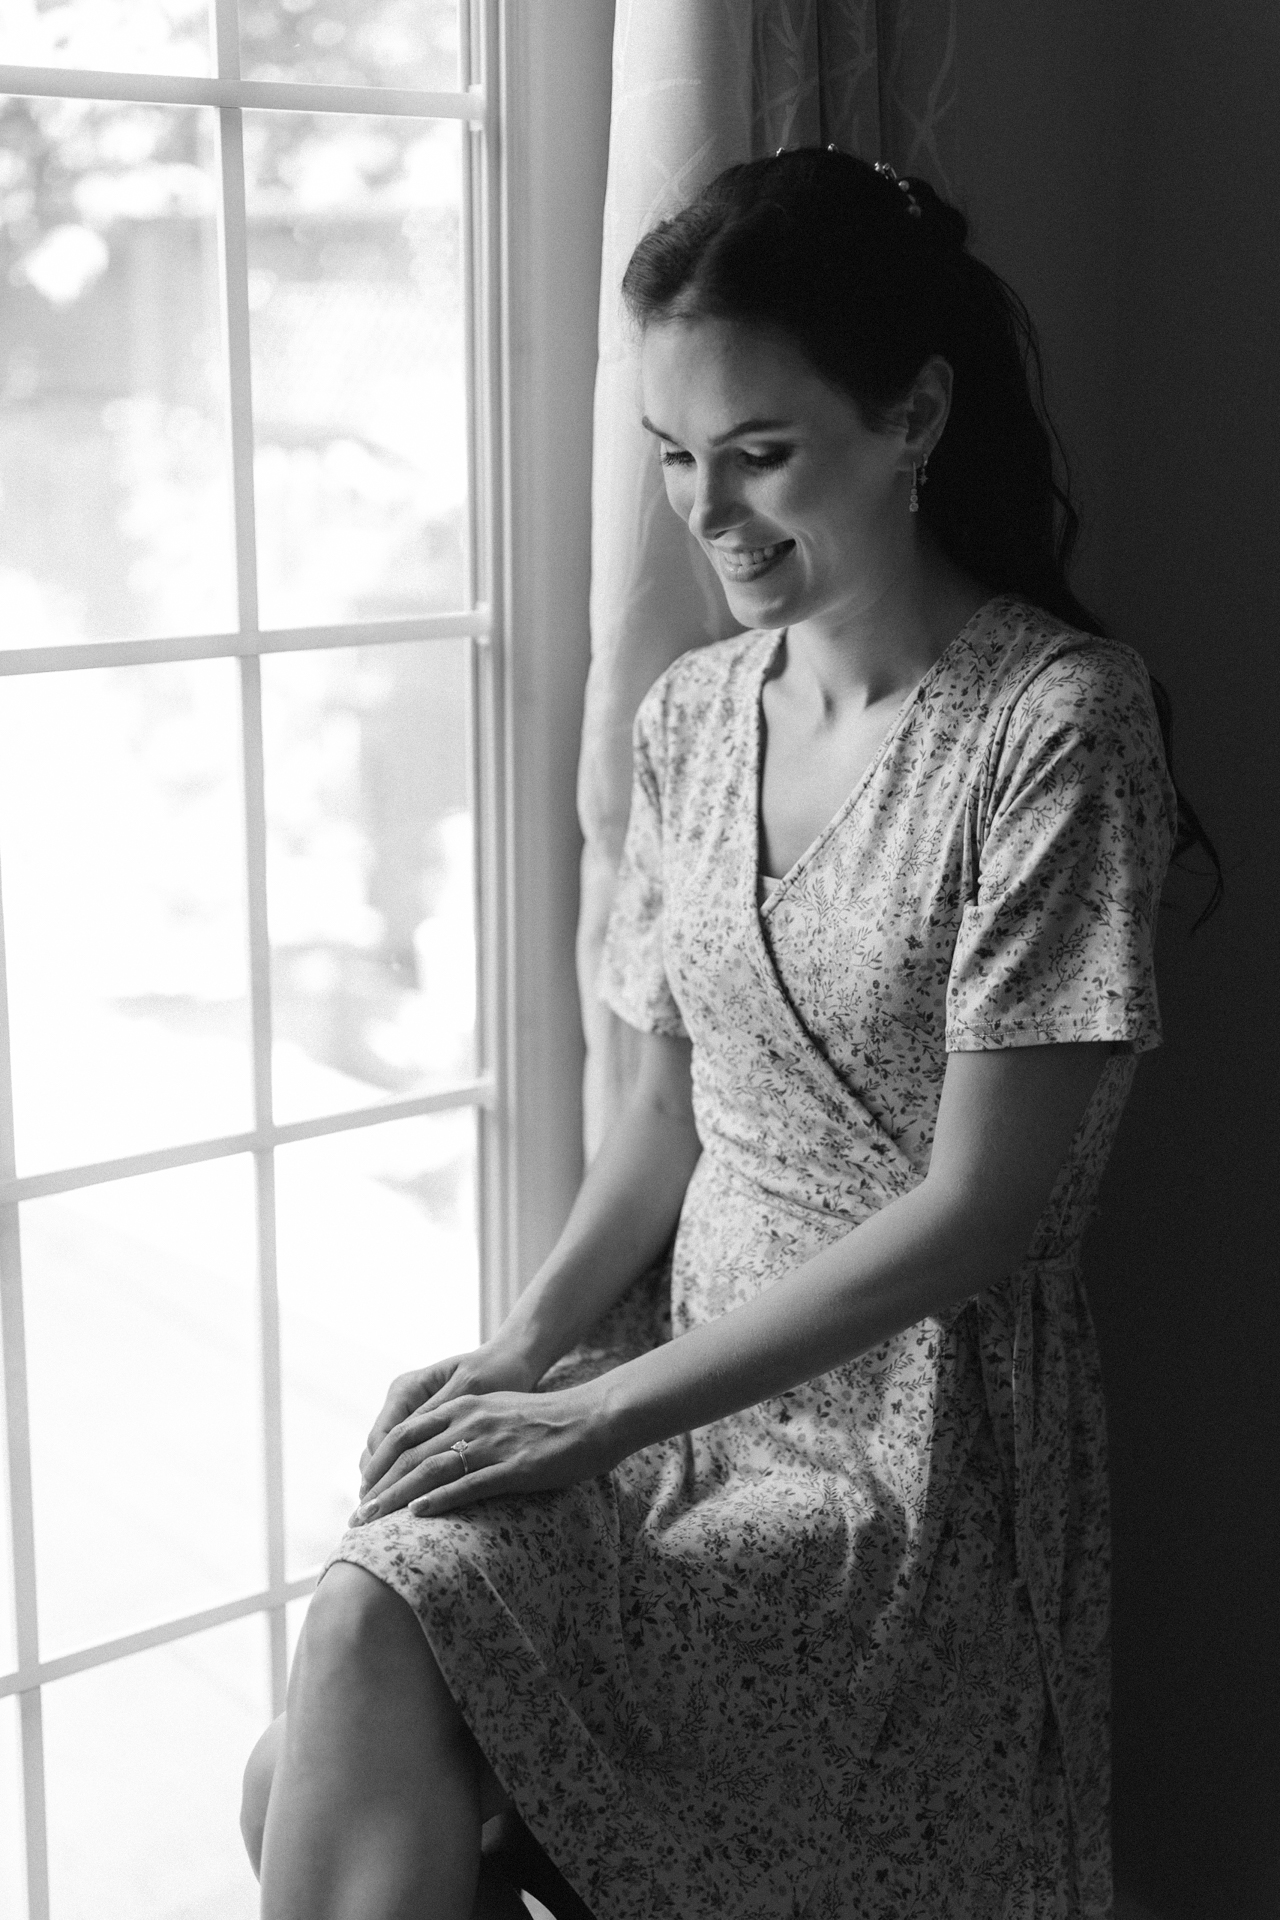 Bride in a floral dress smiling softly while sitting beside a window with sheer curtains.